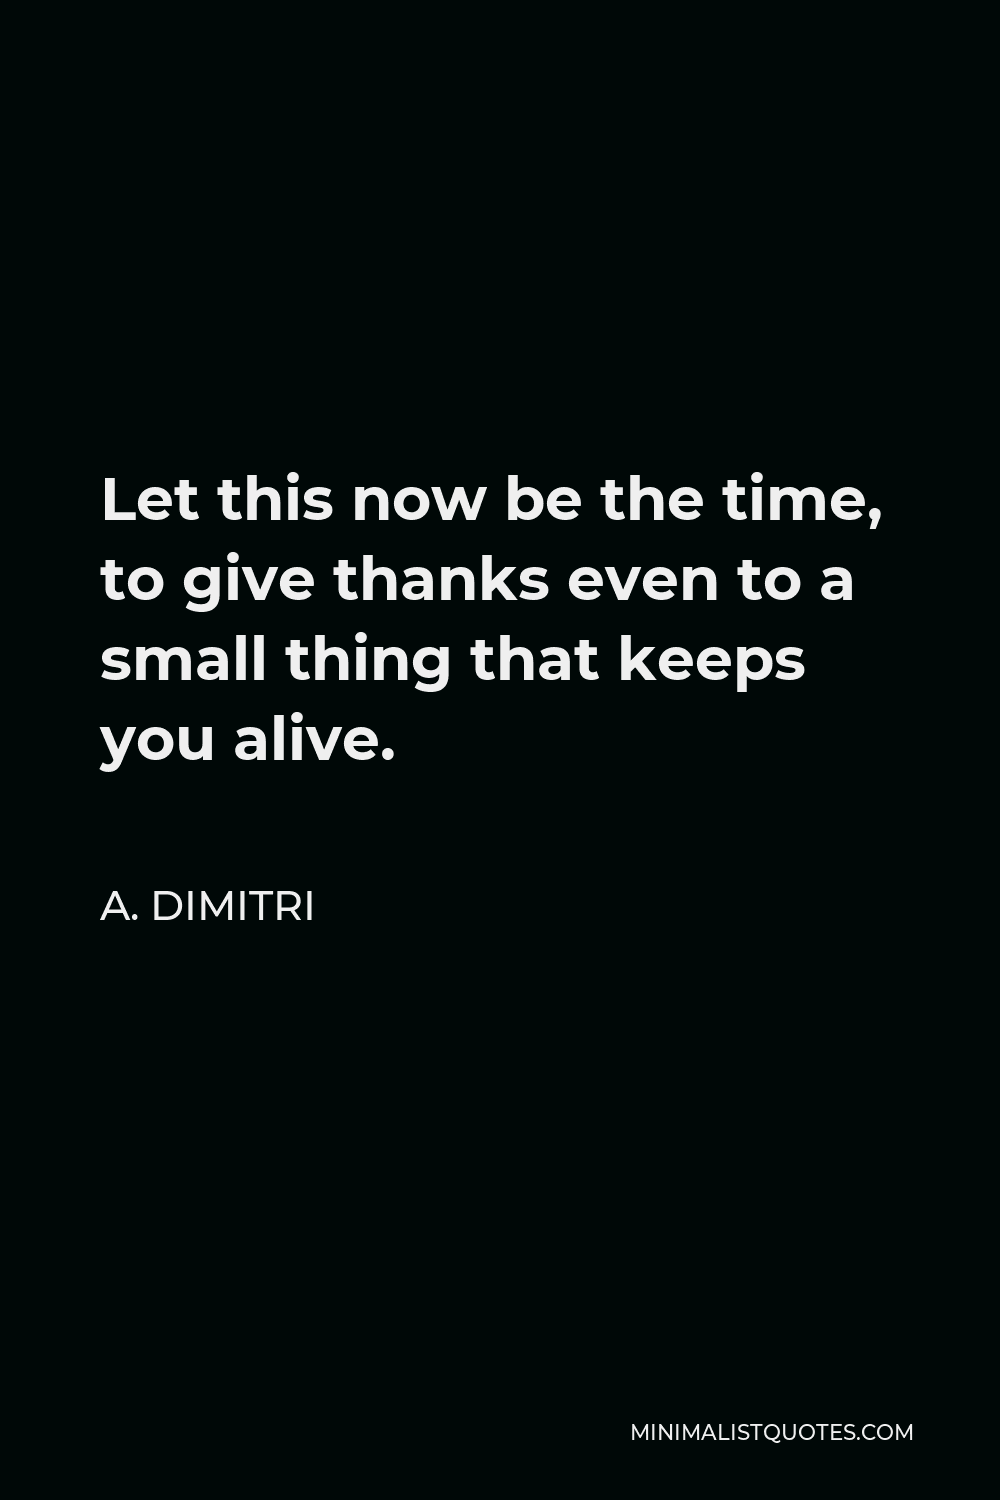 A. Dimitri Quote - Let this now be the time, to give thanks even to a small thing that keeps you alive.